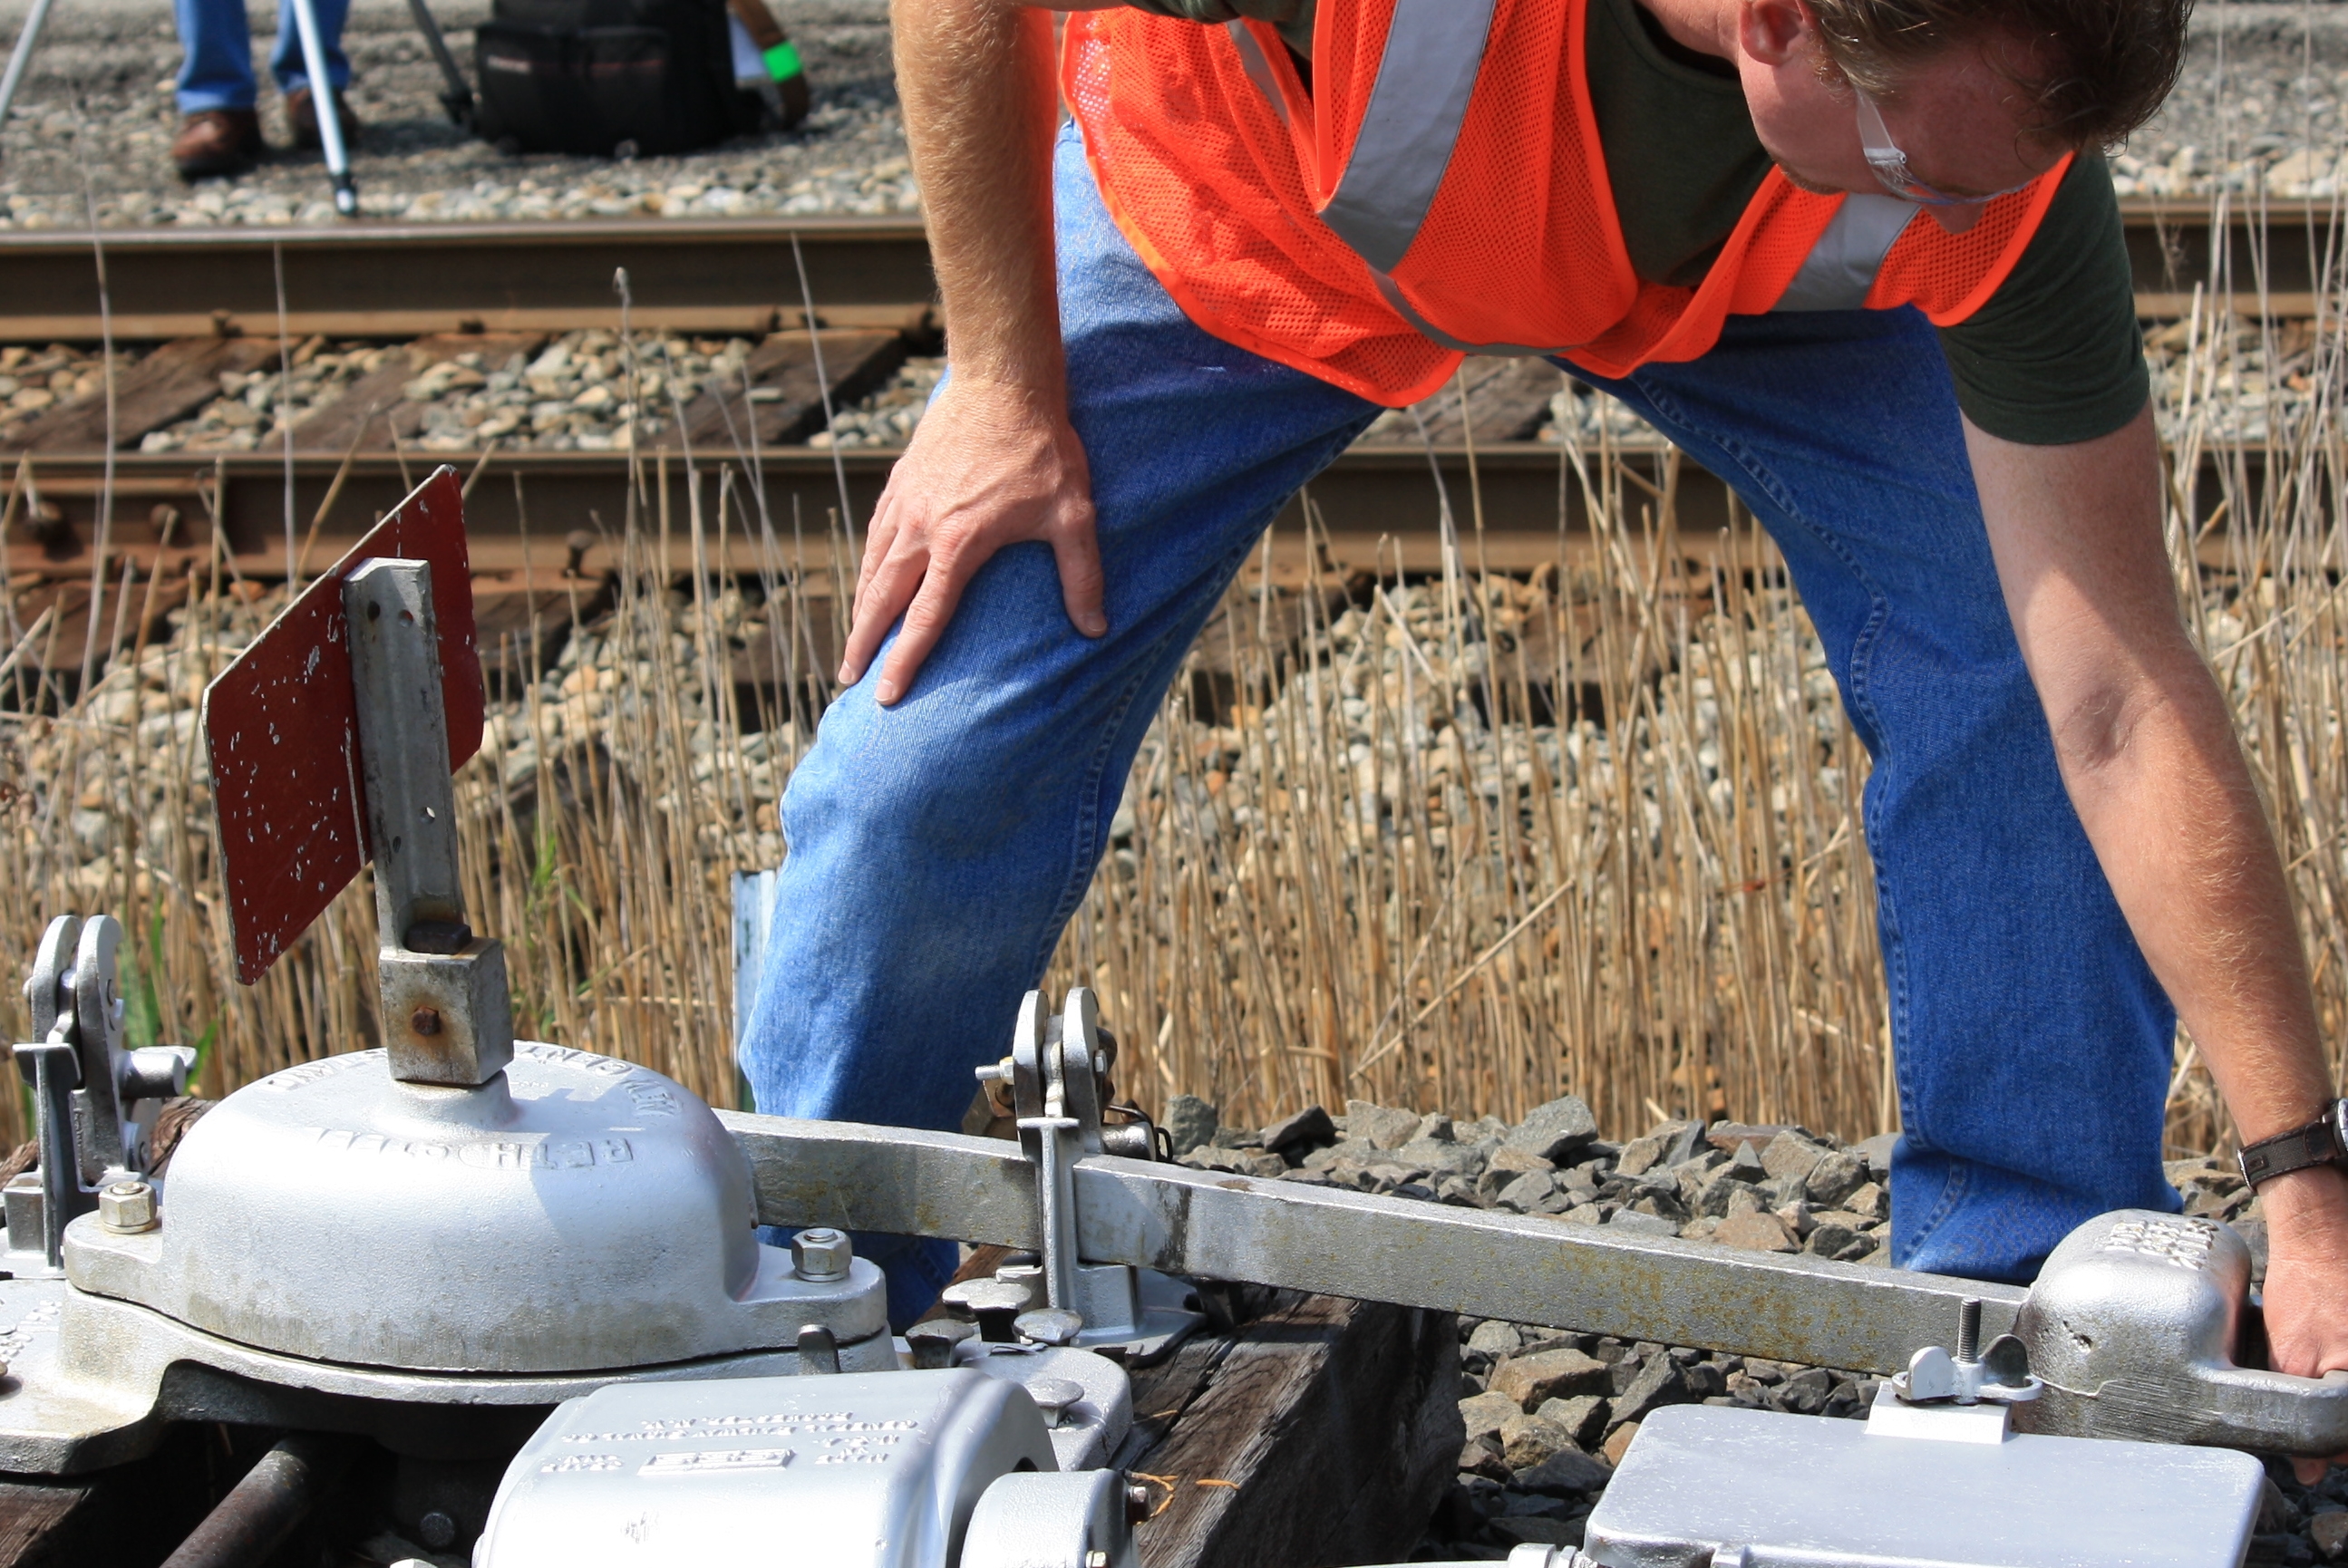  railroad workers received more than $1 million in our federal whistleblower case